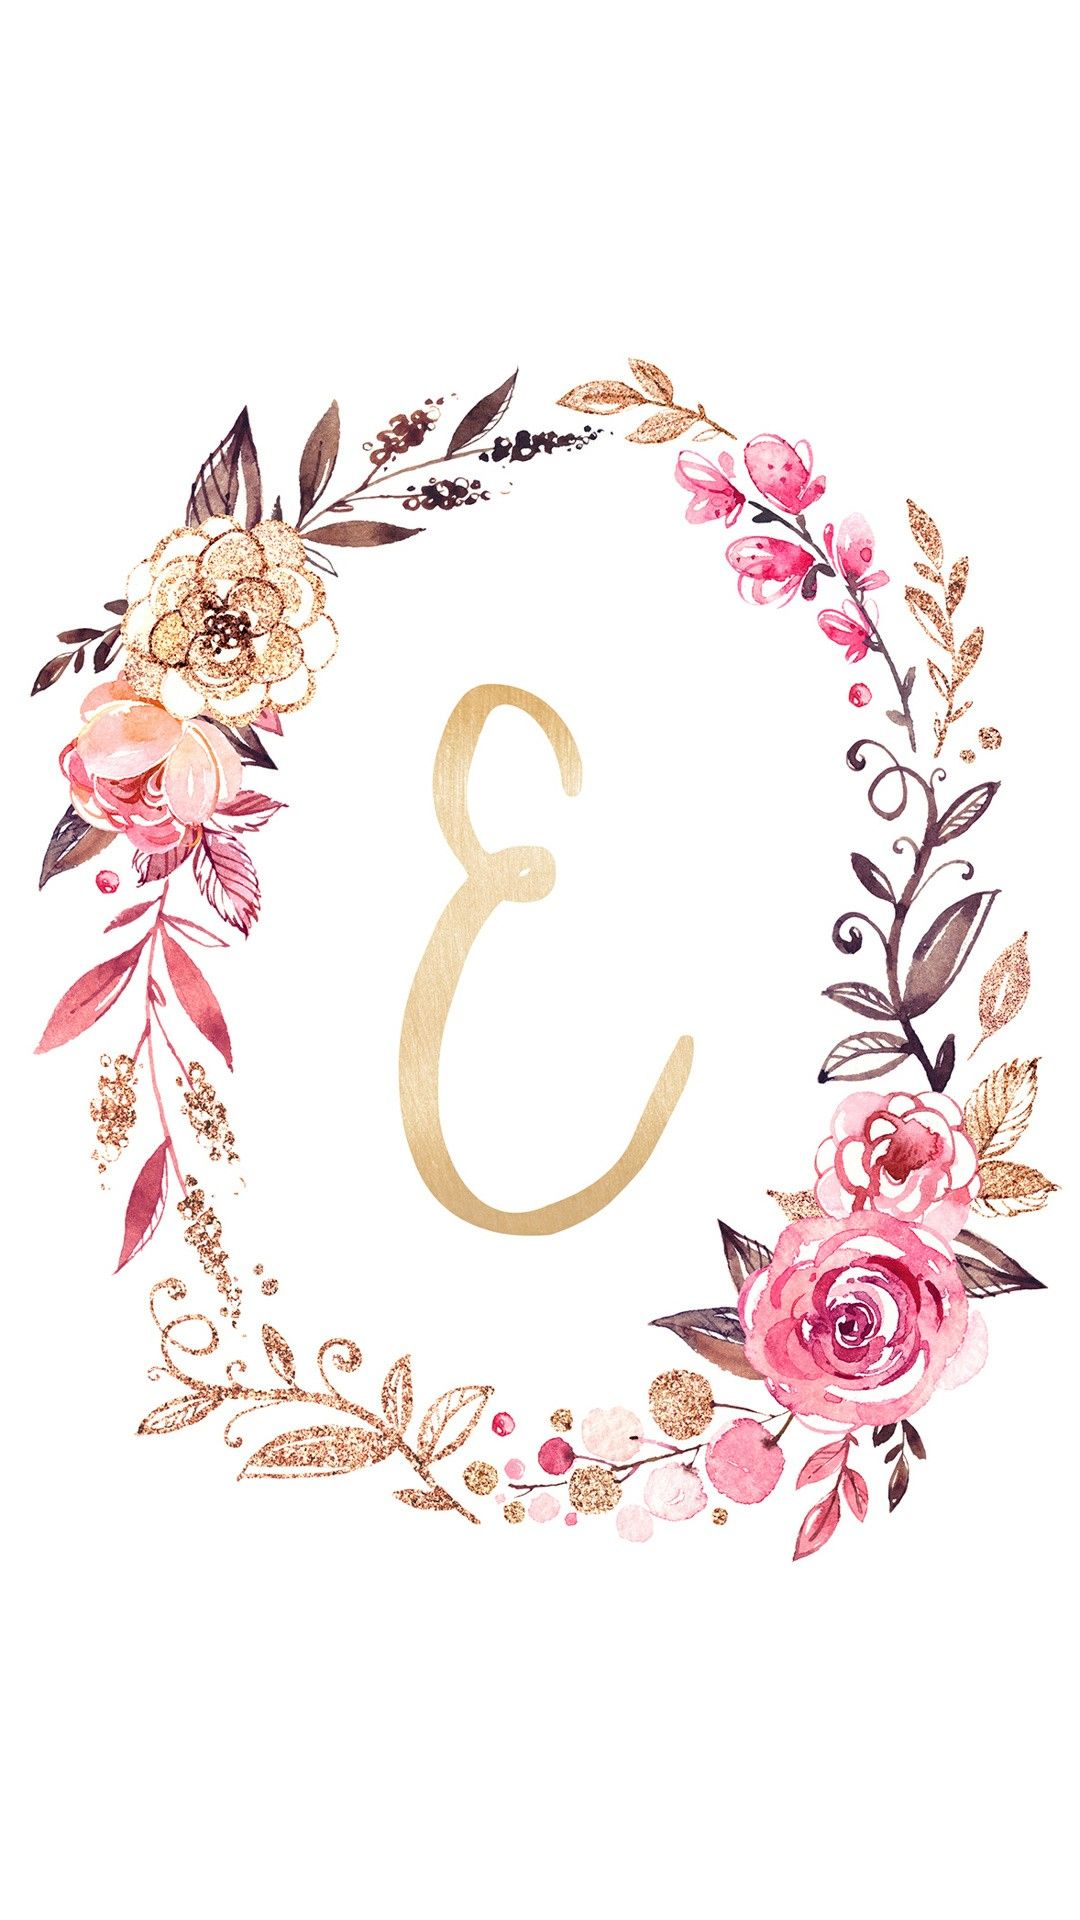 Cute Letter E Wallpapers